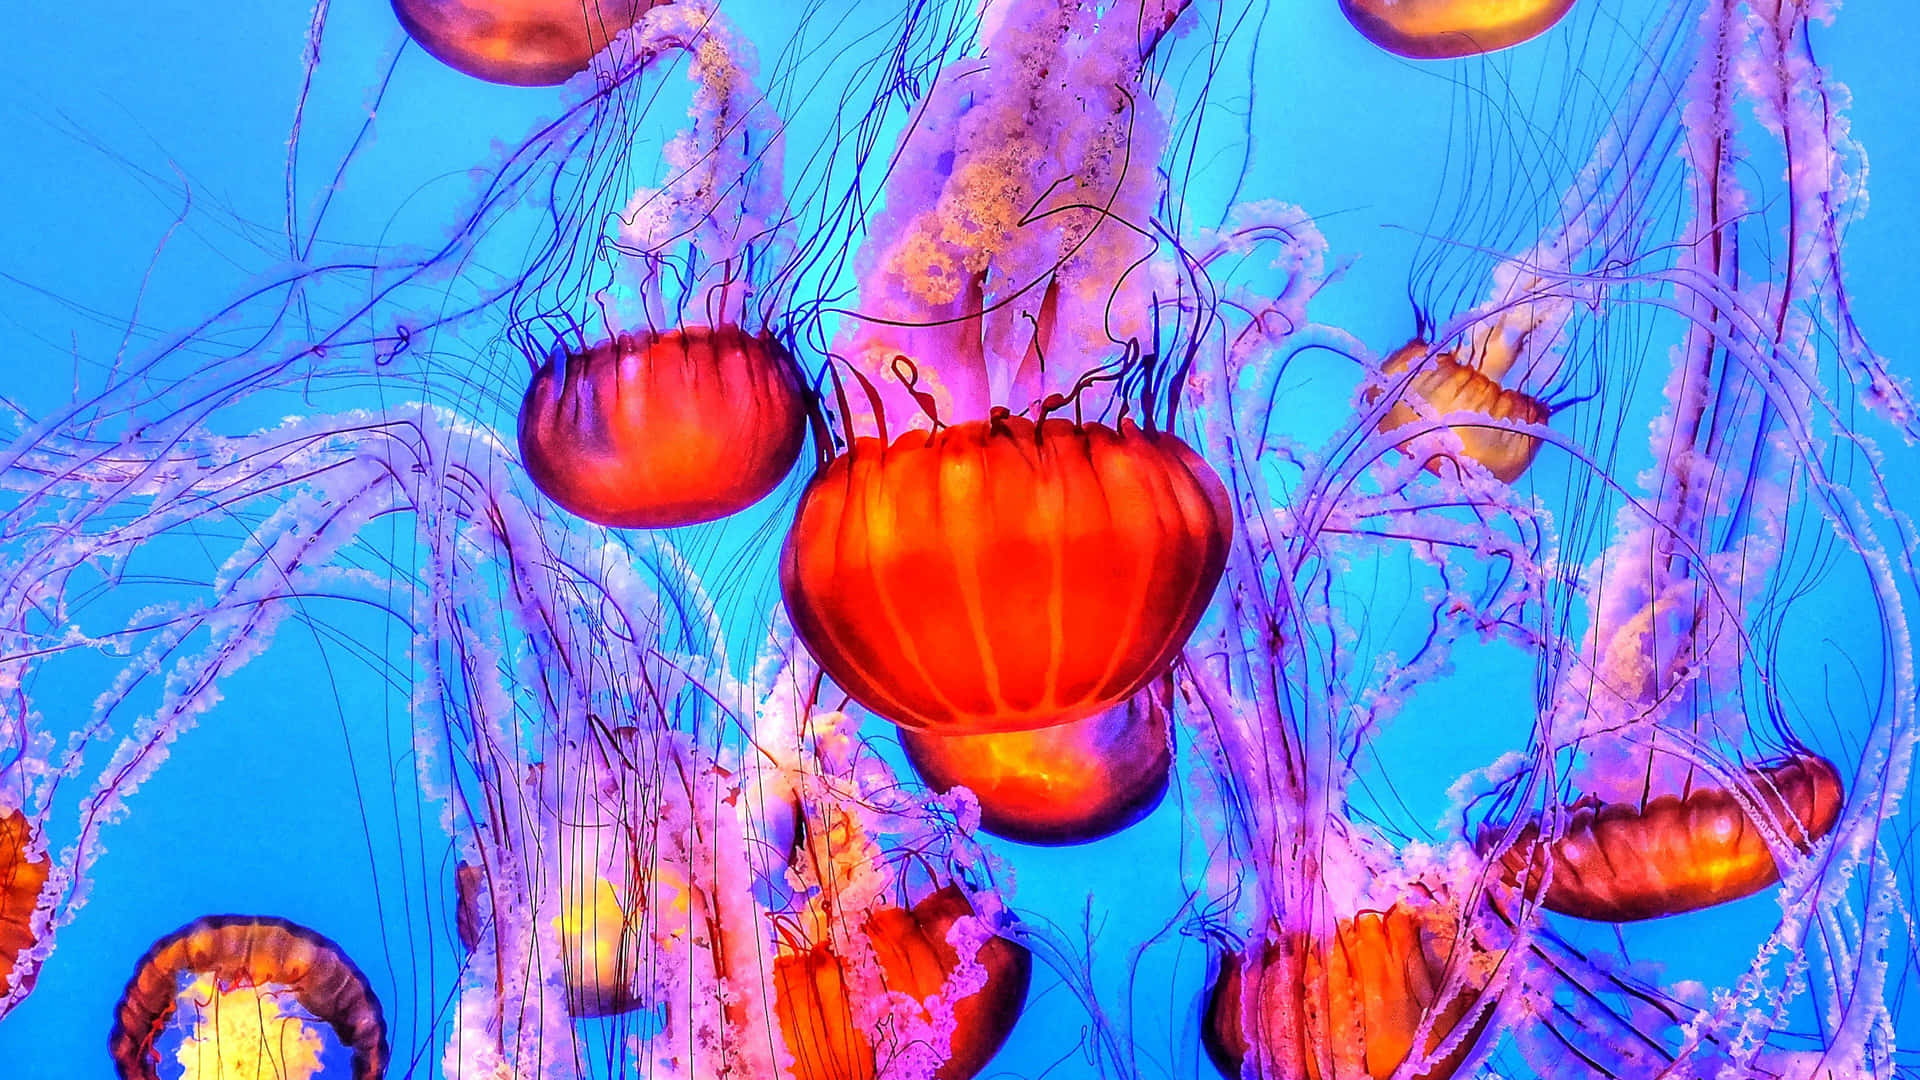 Soaring To New Depths With This 4k Jellyfish